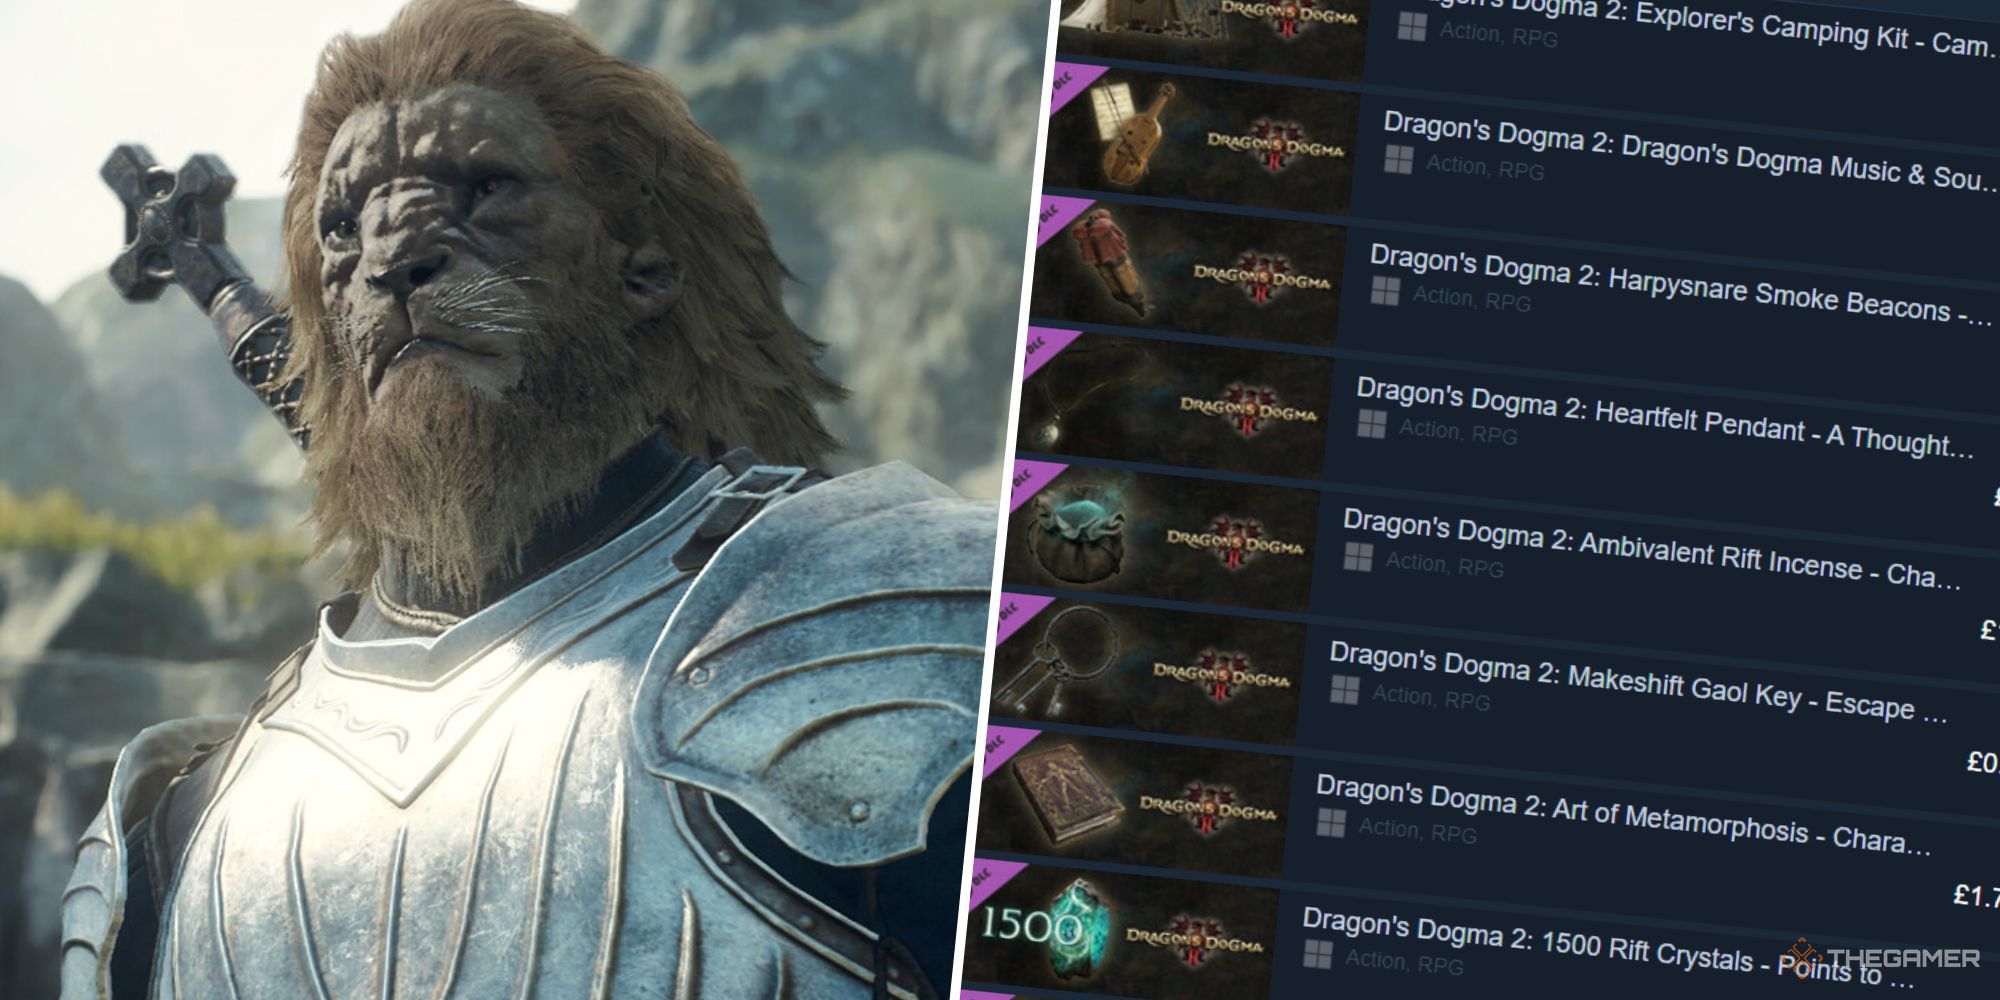 Left: A lion person in Dragon's Dogma 2, wearing armour. Right: The Steam store page for all of the paid DLC in Dragon's Dogma 2.